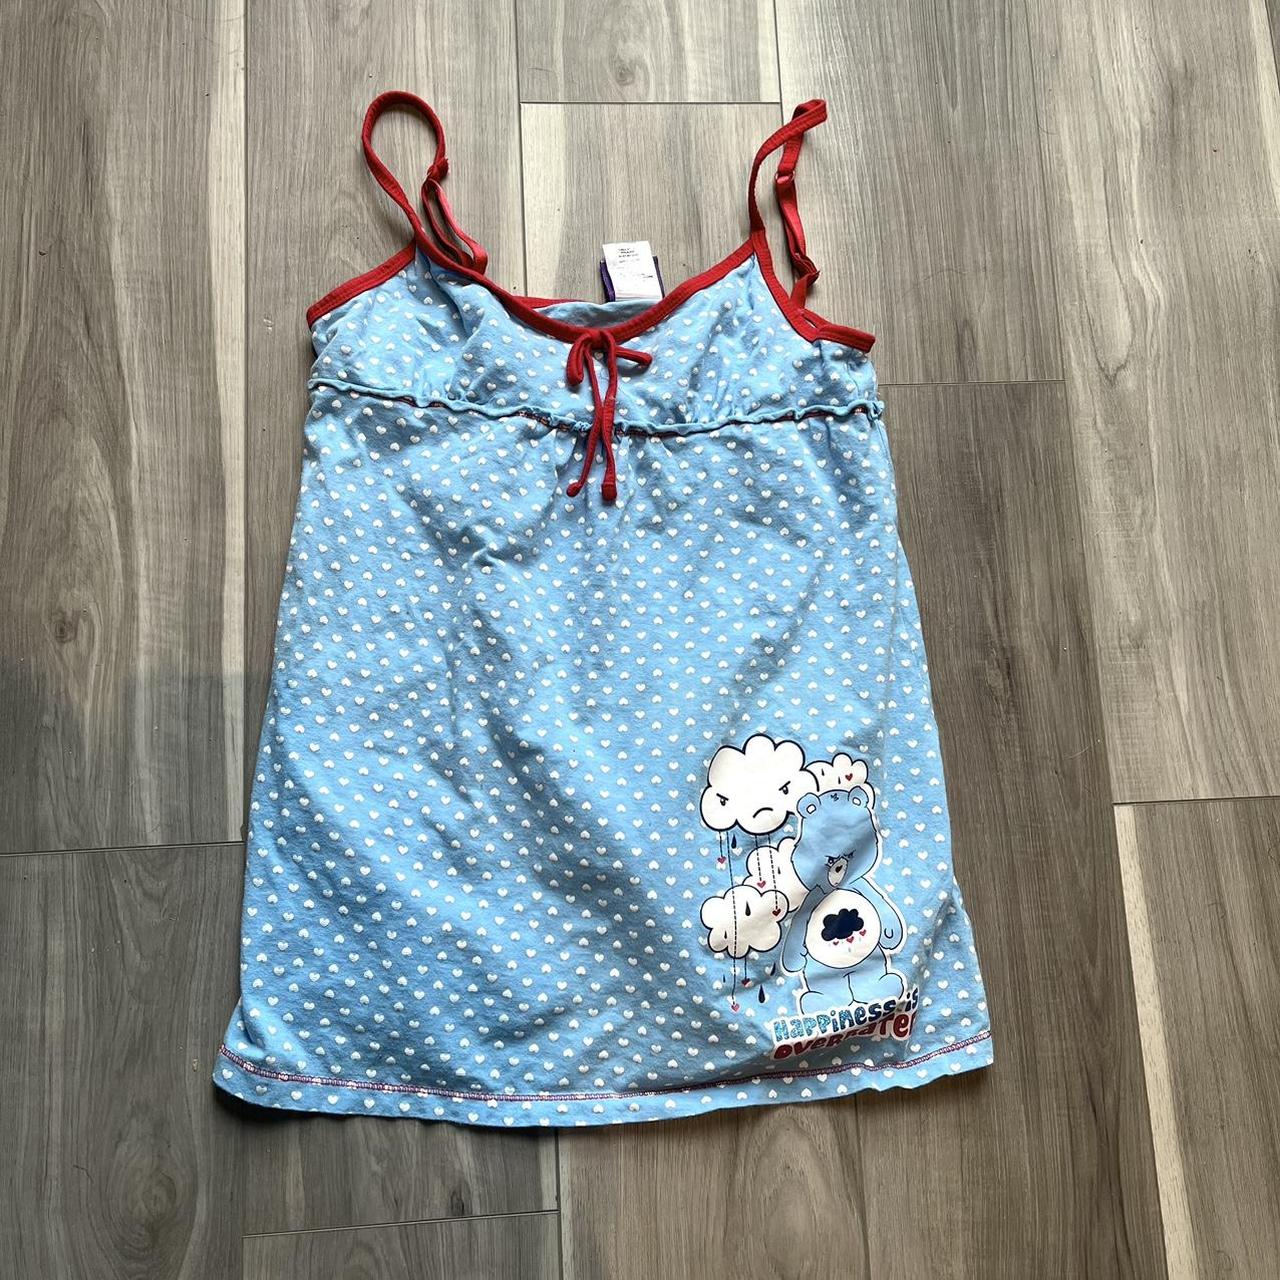 Care Bears Women's White and Blue Vest (2)